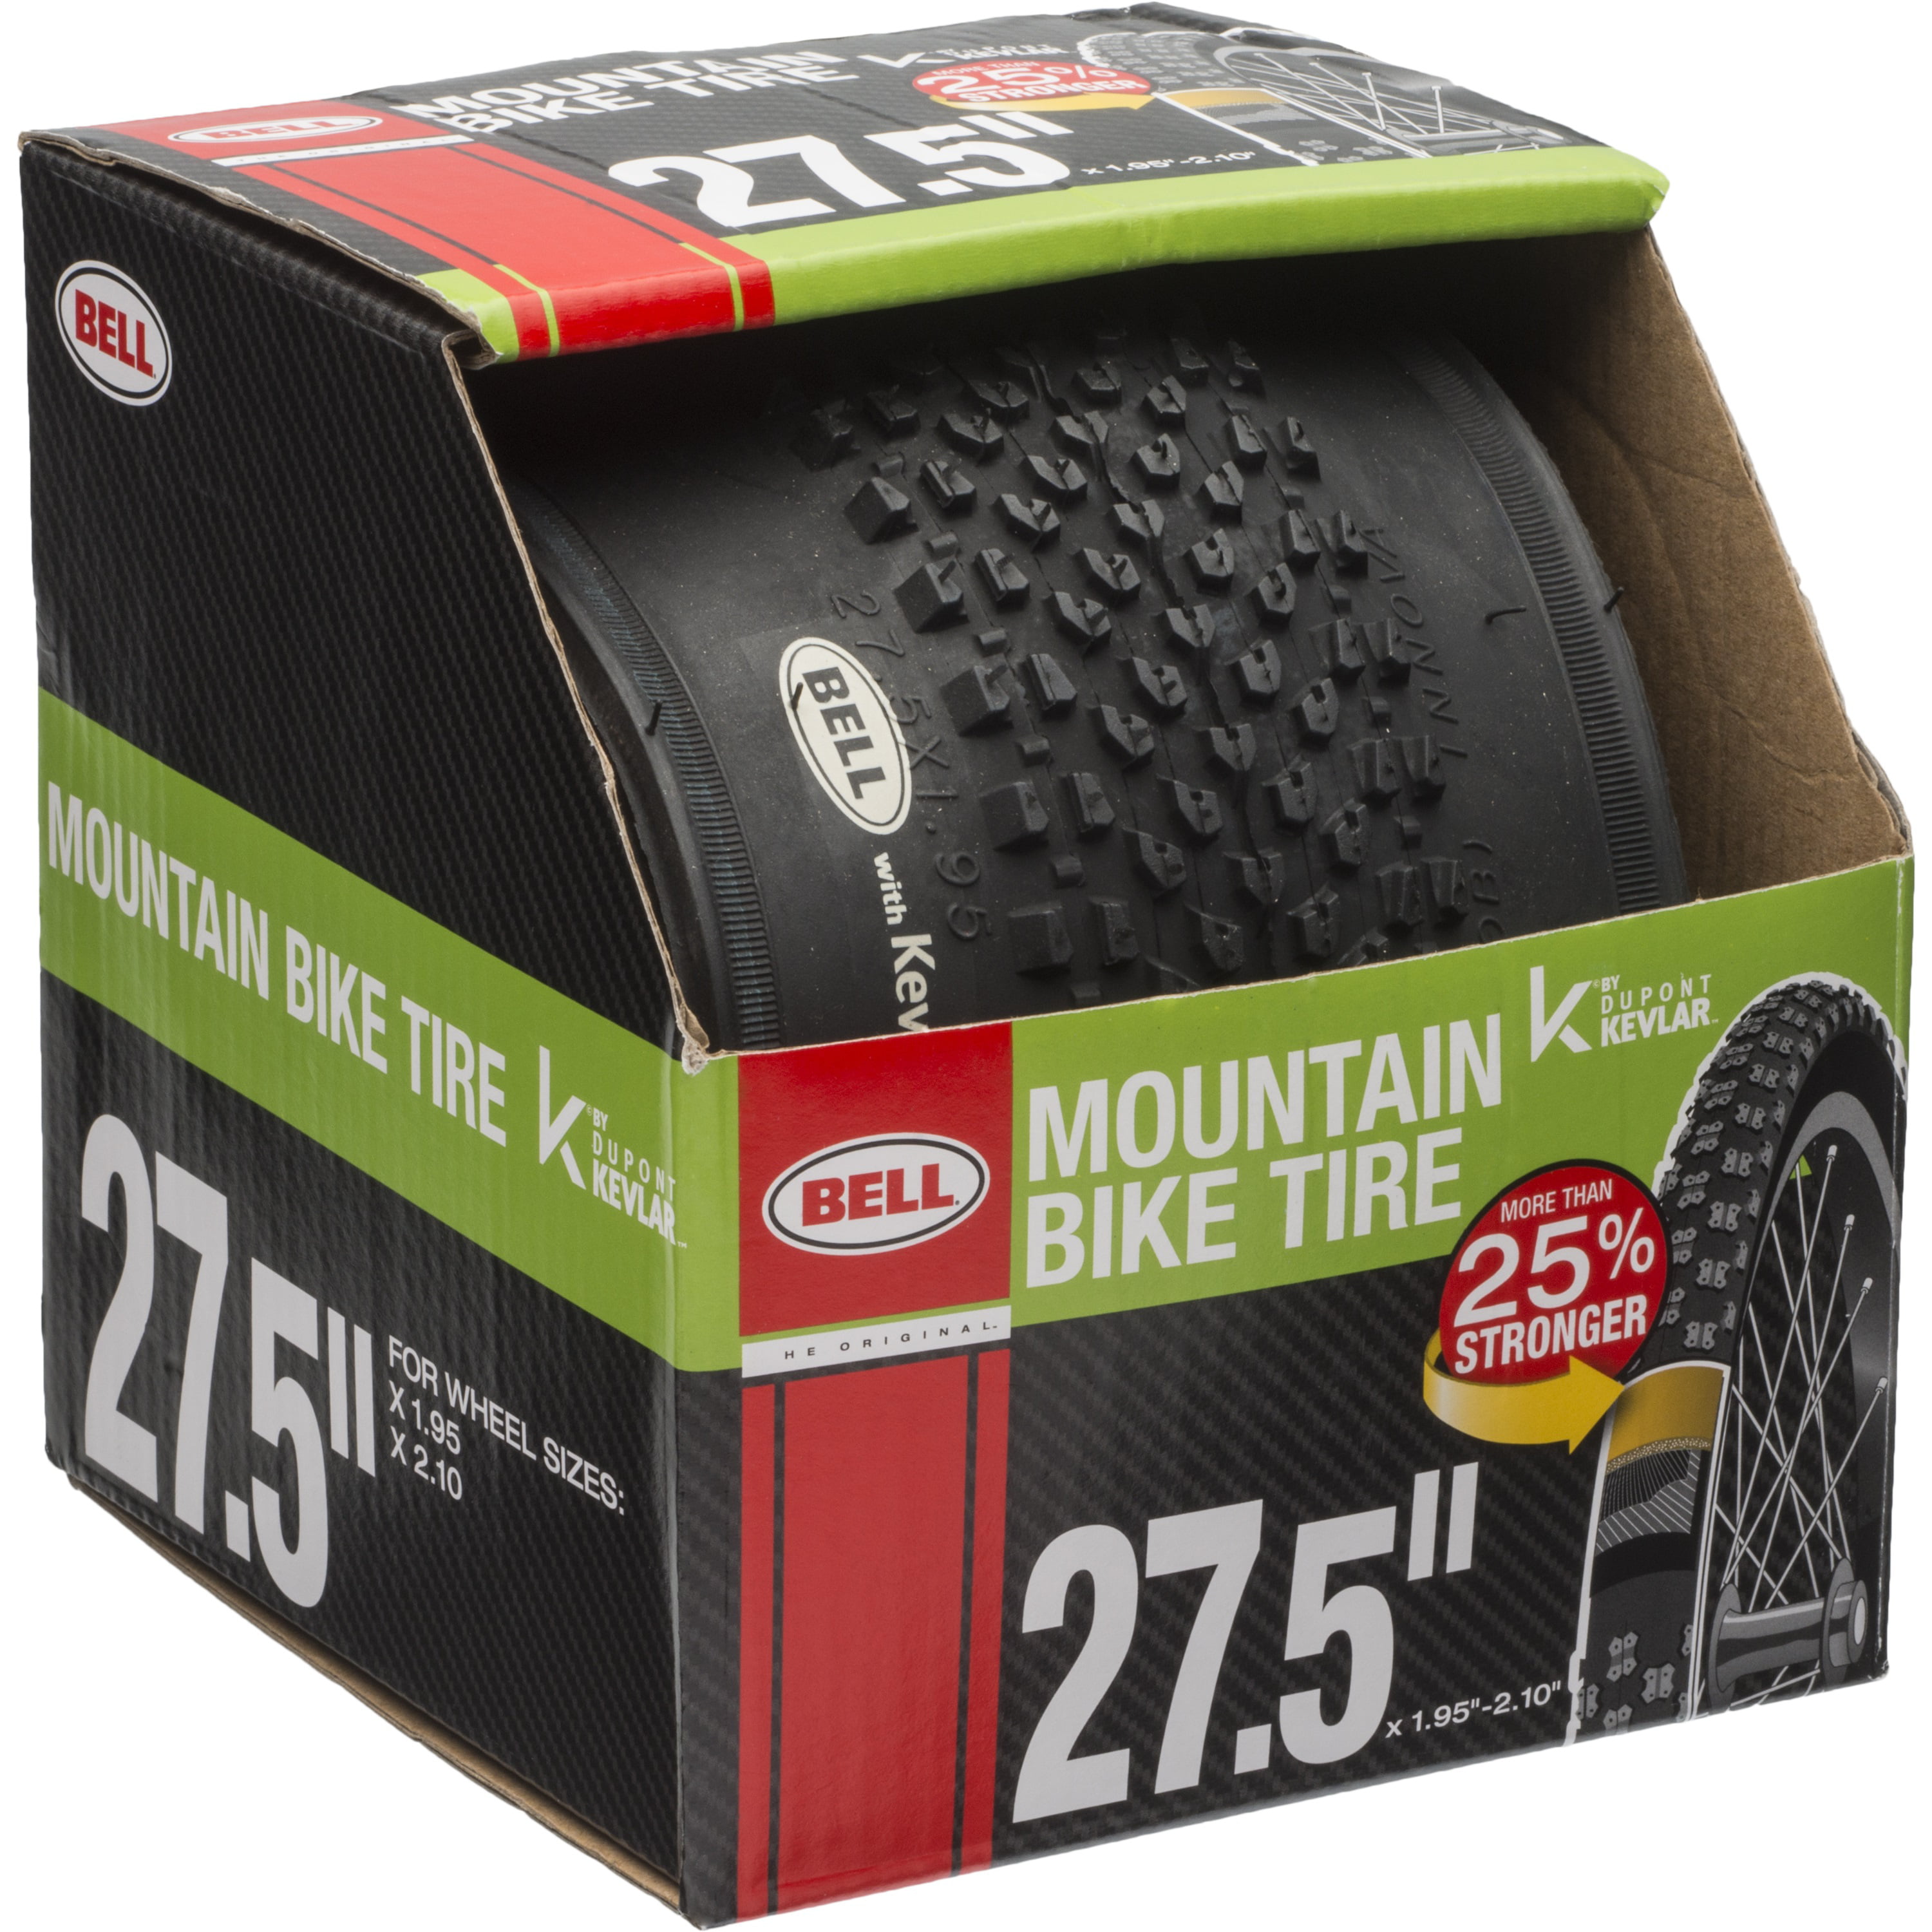 2 Pair of Bell 27in Road Bike Tire With Kevlar for sale online